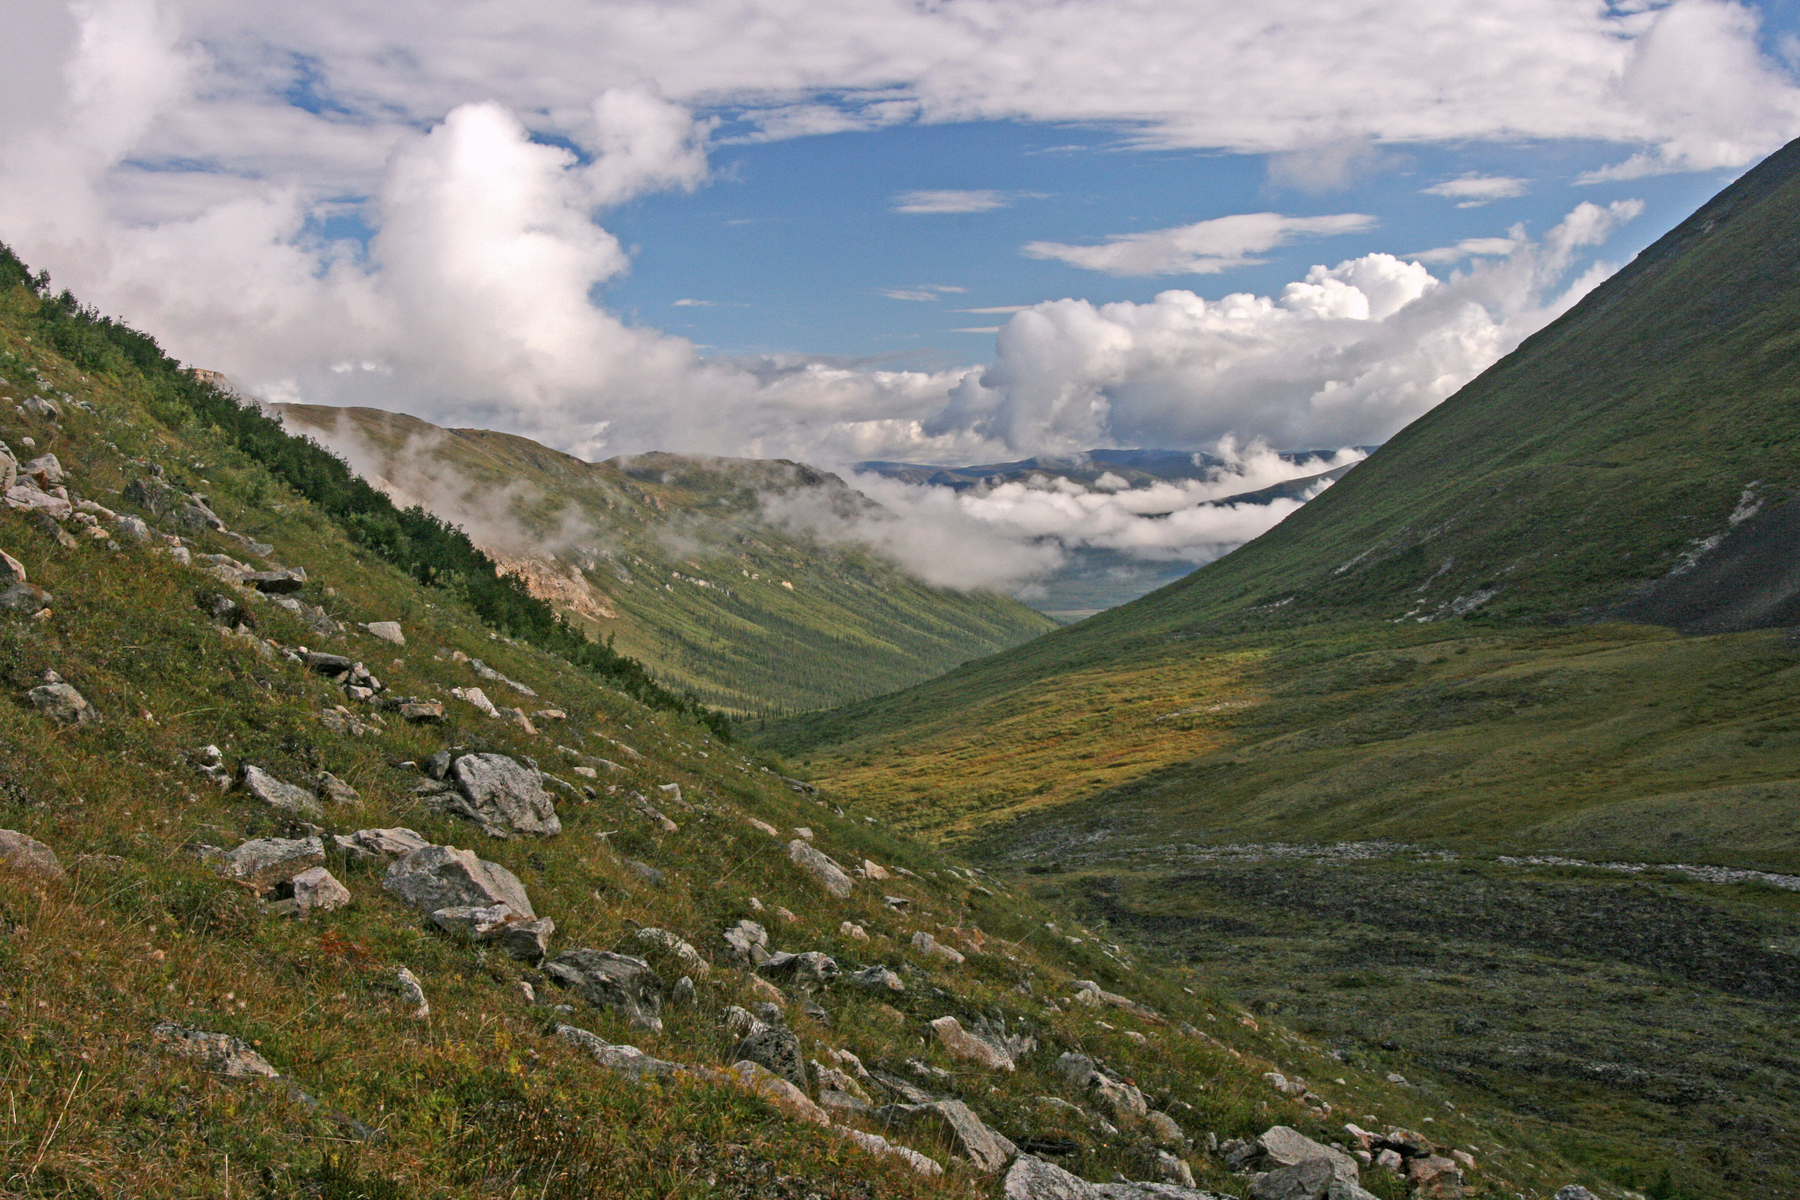 tundra in the Arrigetch Peaks region, Gates of the Arctic National Park, Alaska